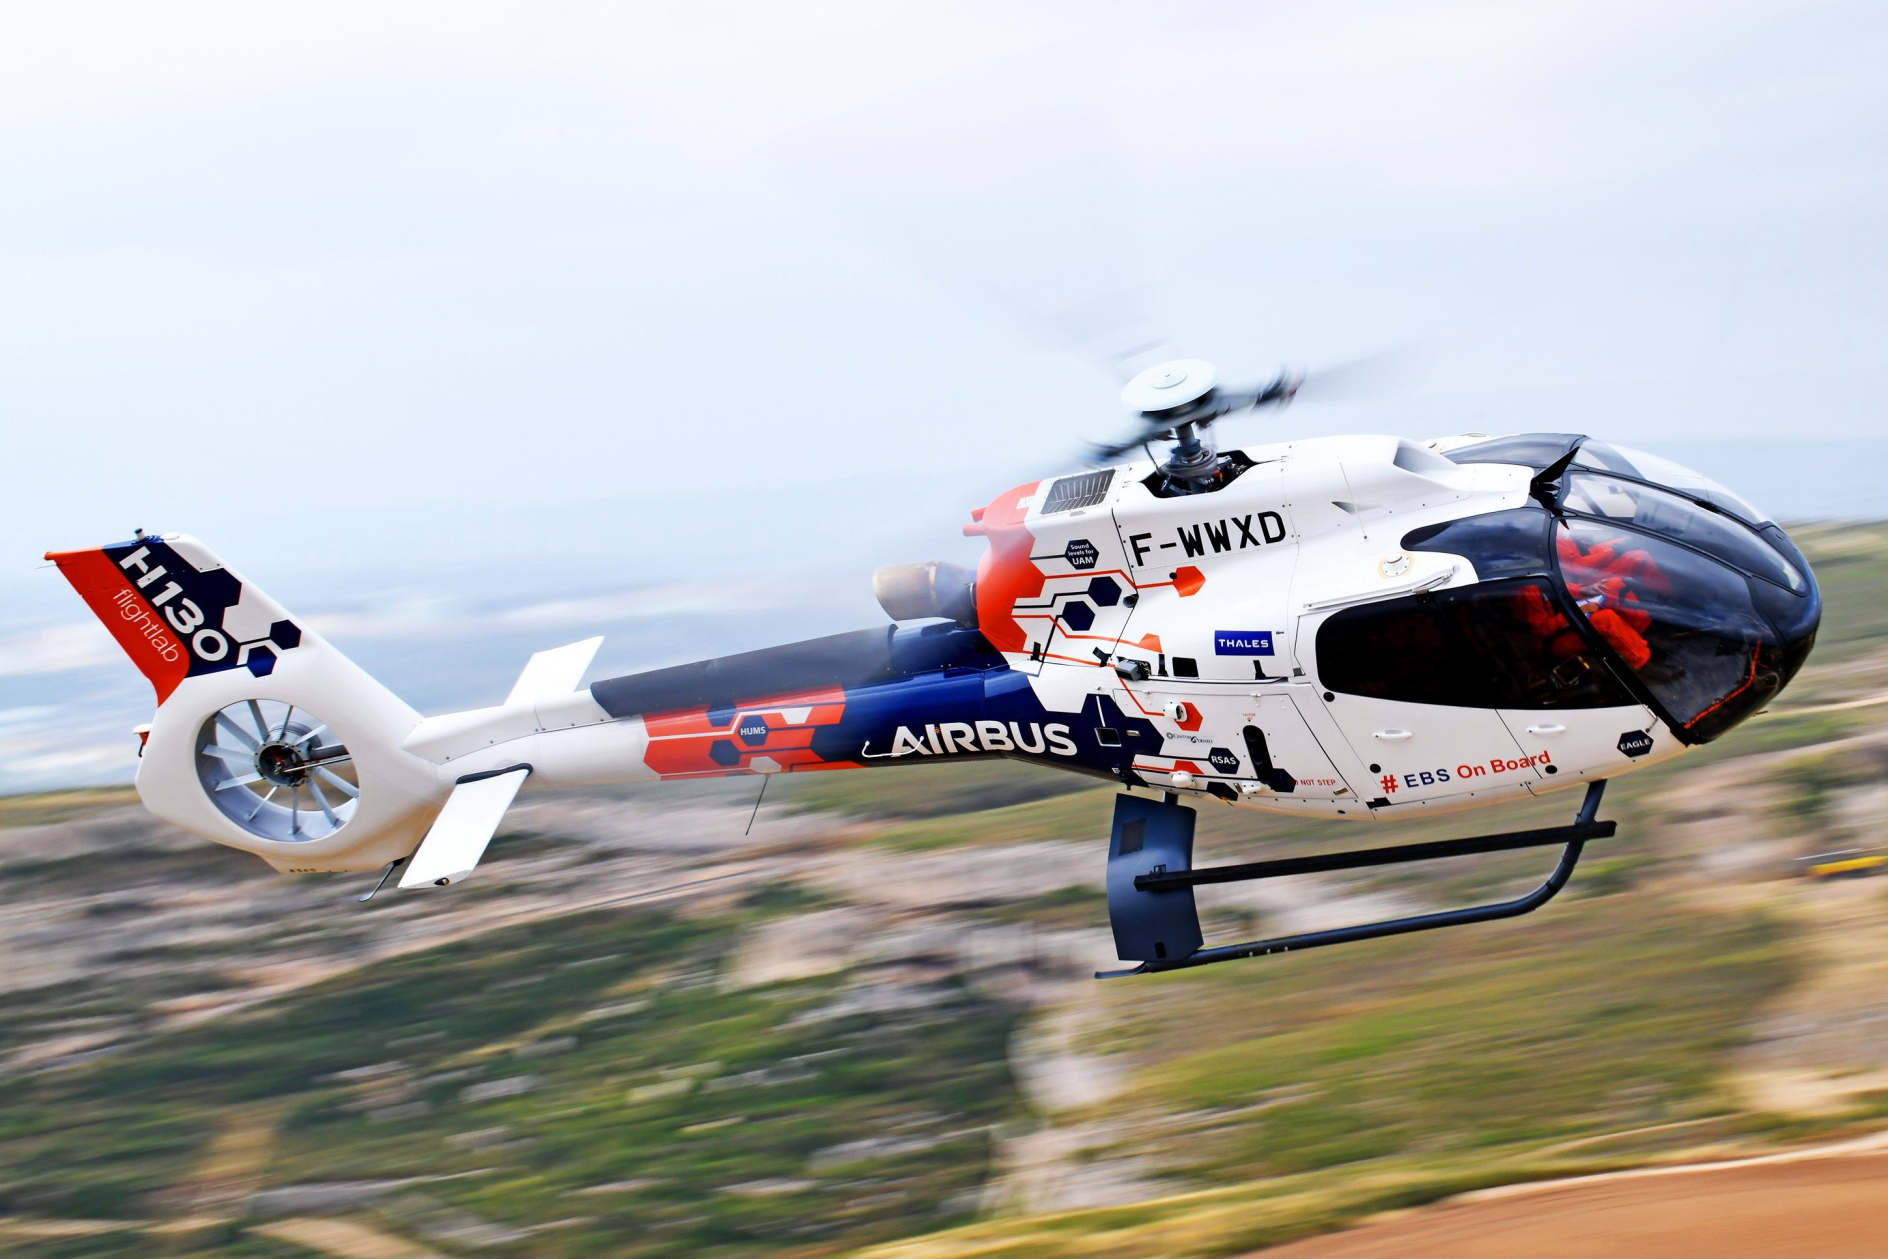 Airbus Helicopters, in partnership with the French Civil Aviation Authority (DGAC), has started flight testing an engine back-up system (EBS) onboard its Flightlab aircraft. Click to enlarge.